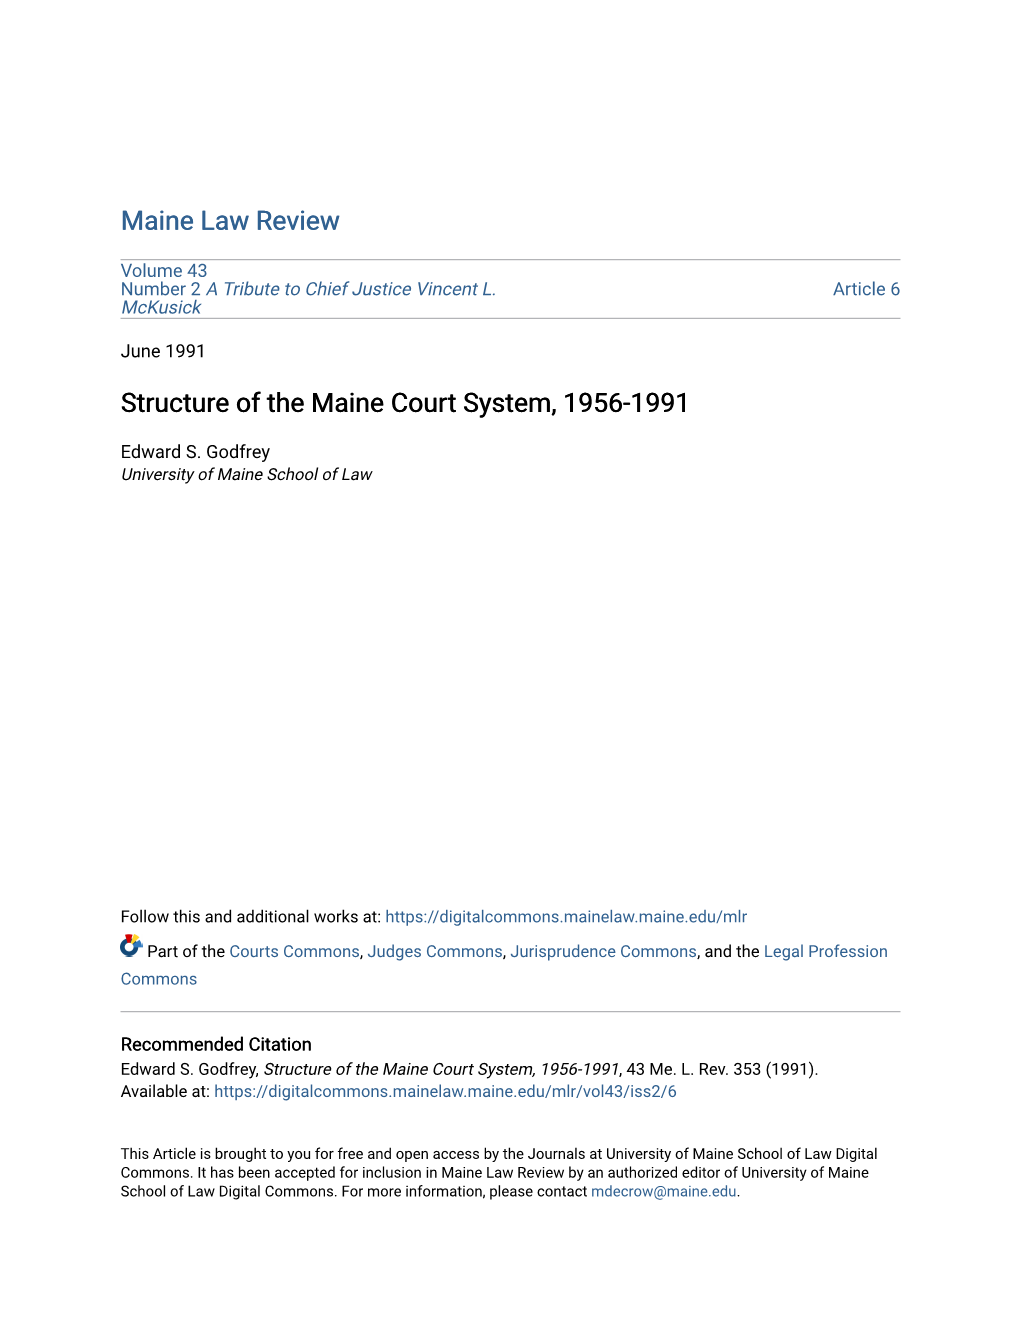 Structure of the Maine Court System, 1956-1991